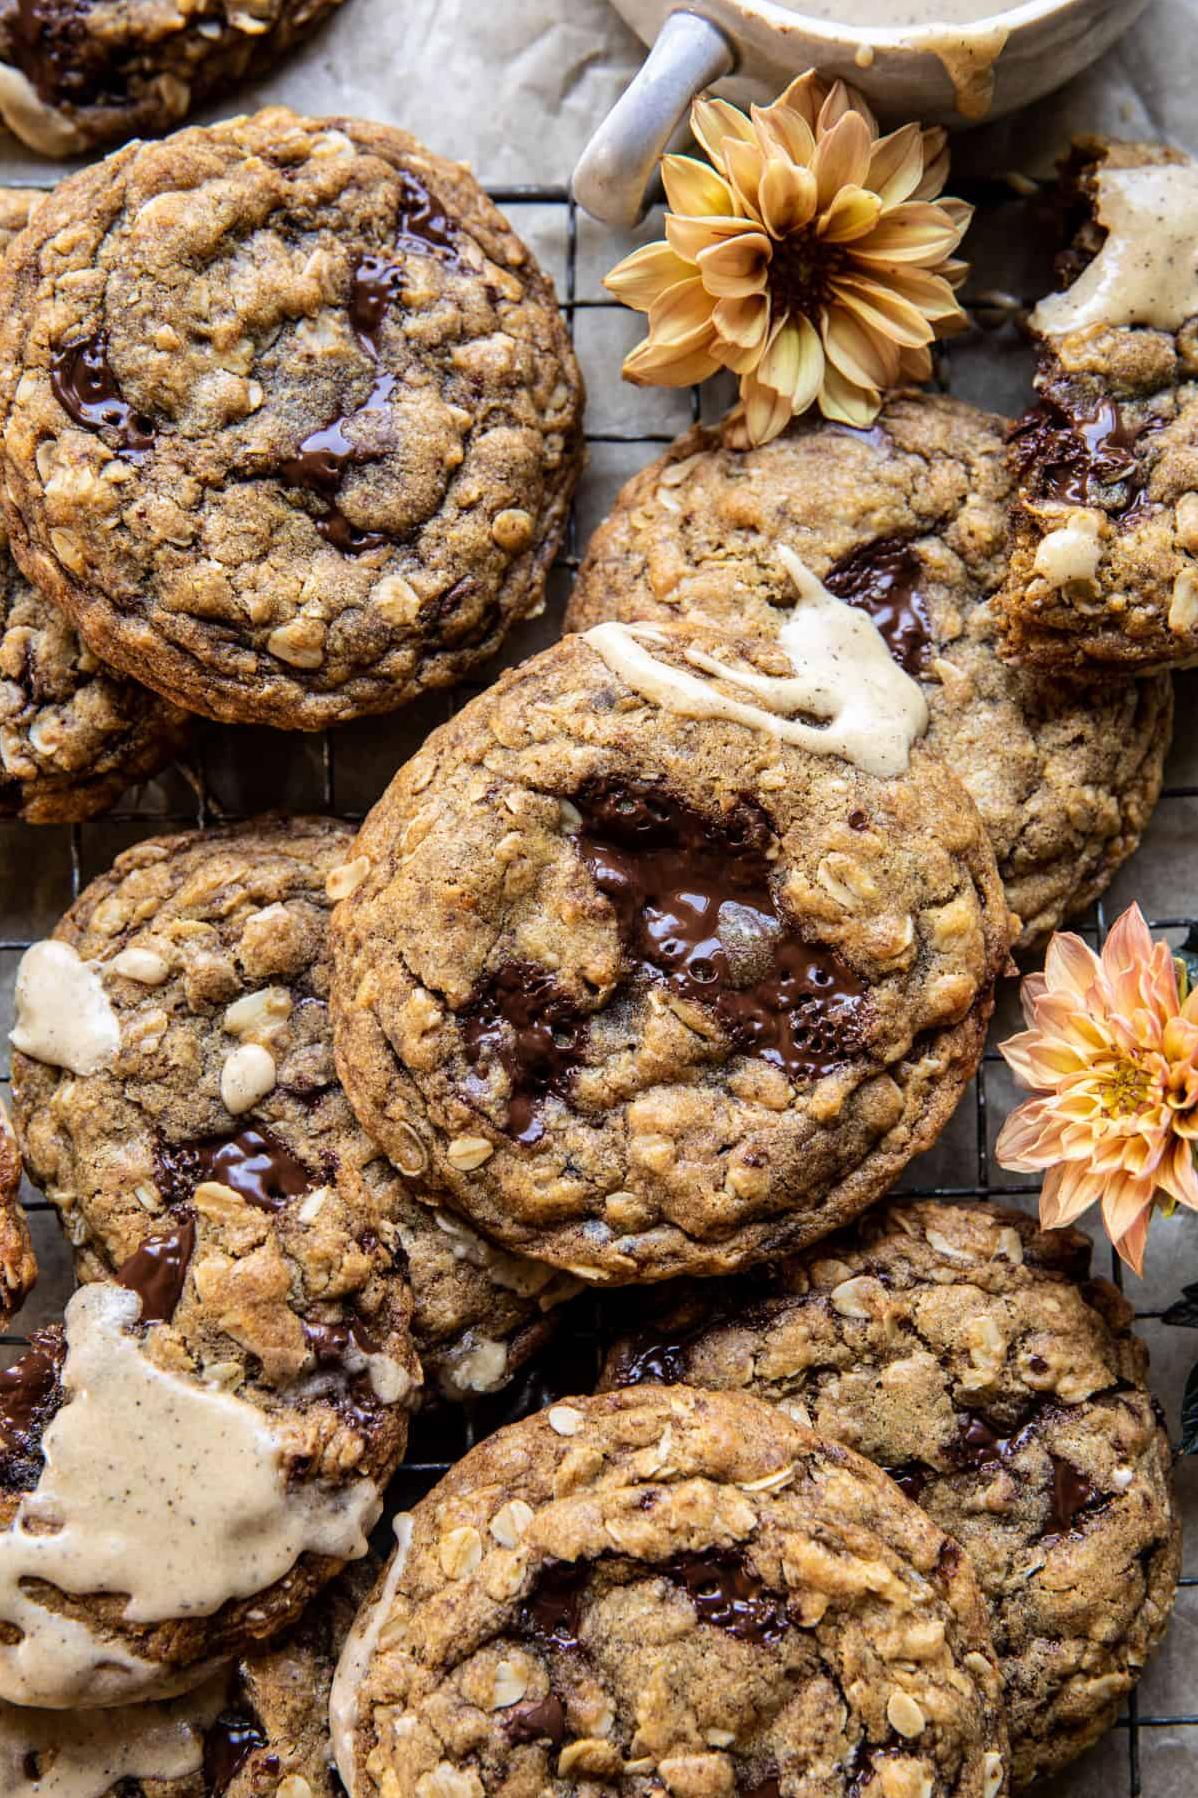  Have you ever tried cookies with a little kick? These mocha cookies will give you just that.